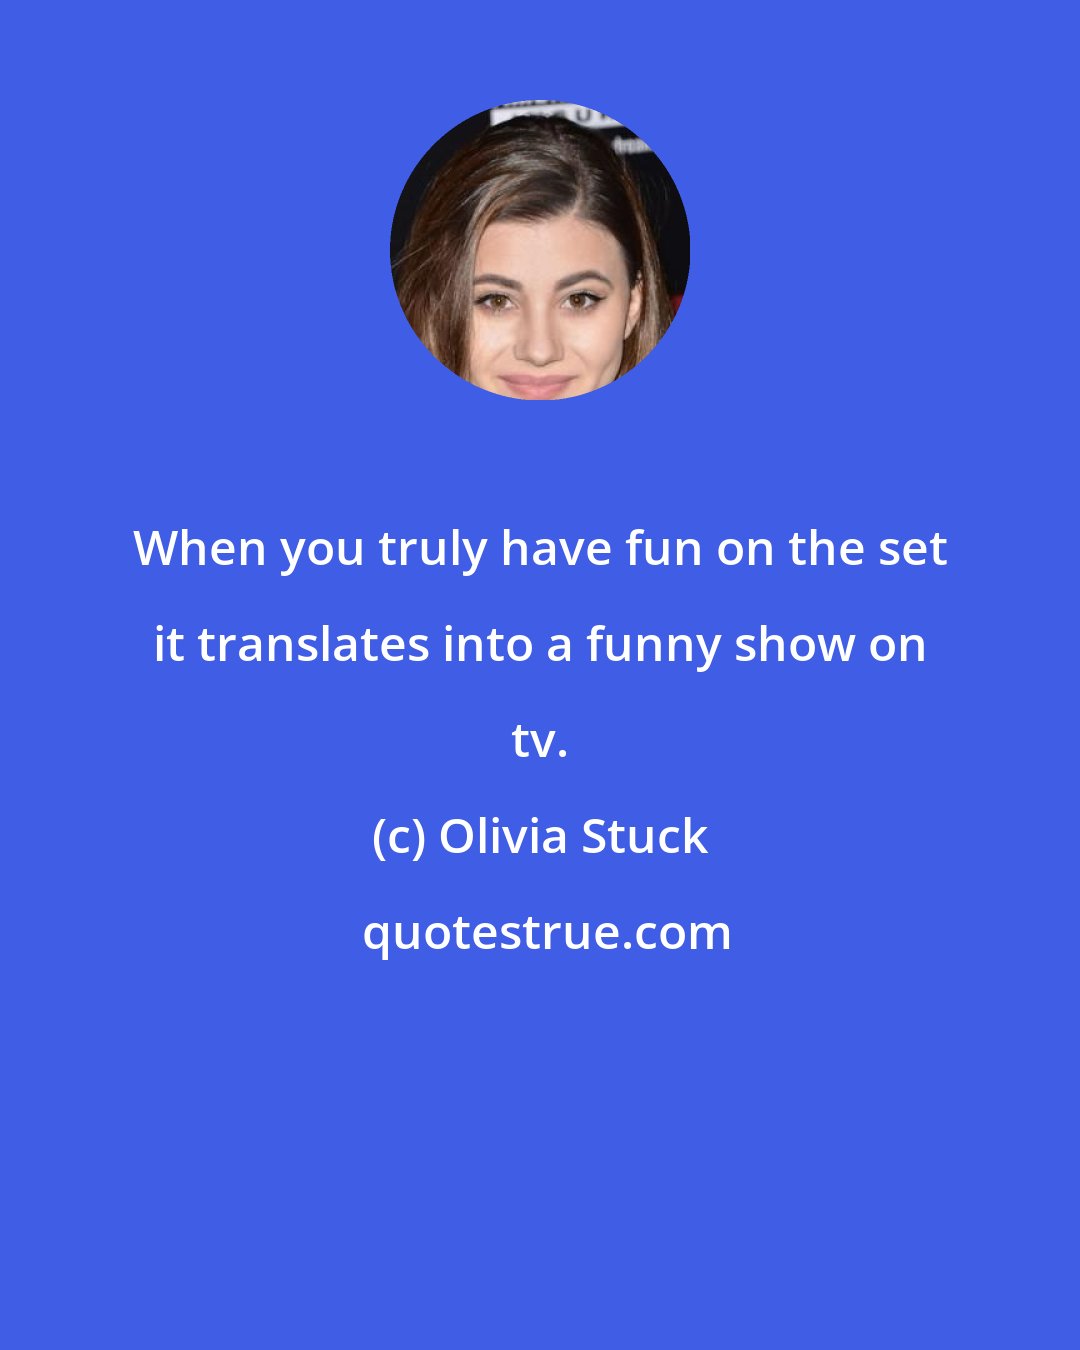 Olivia Stuck: When you truly have fun on the set it translates into a funny show on tv.